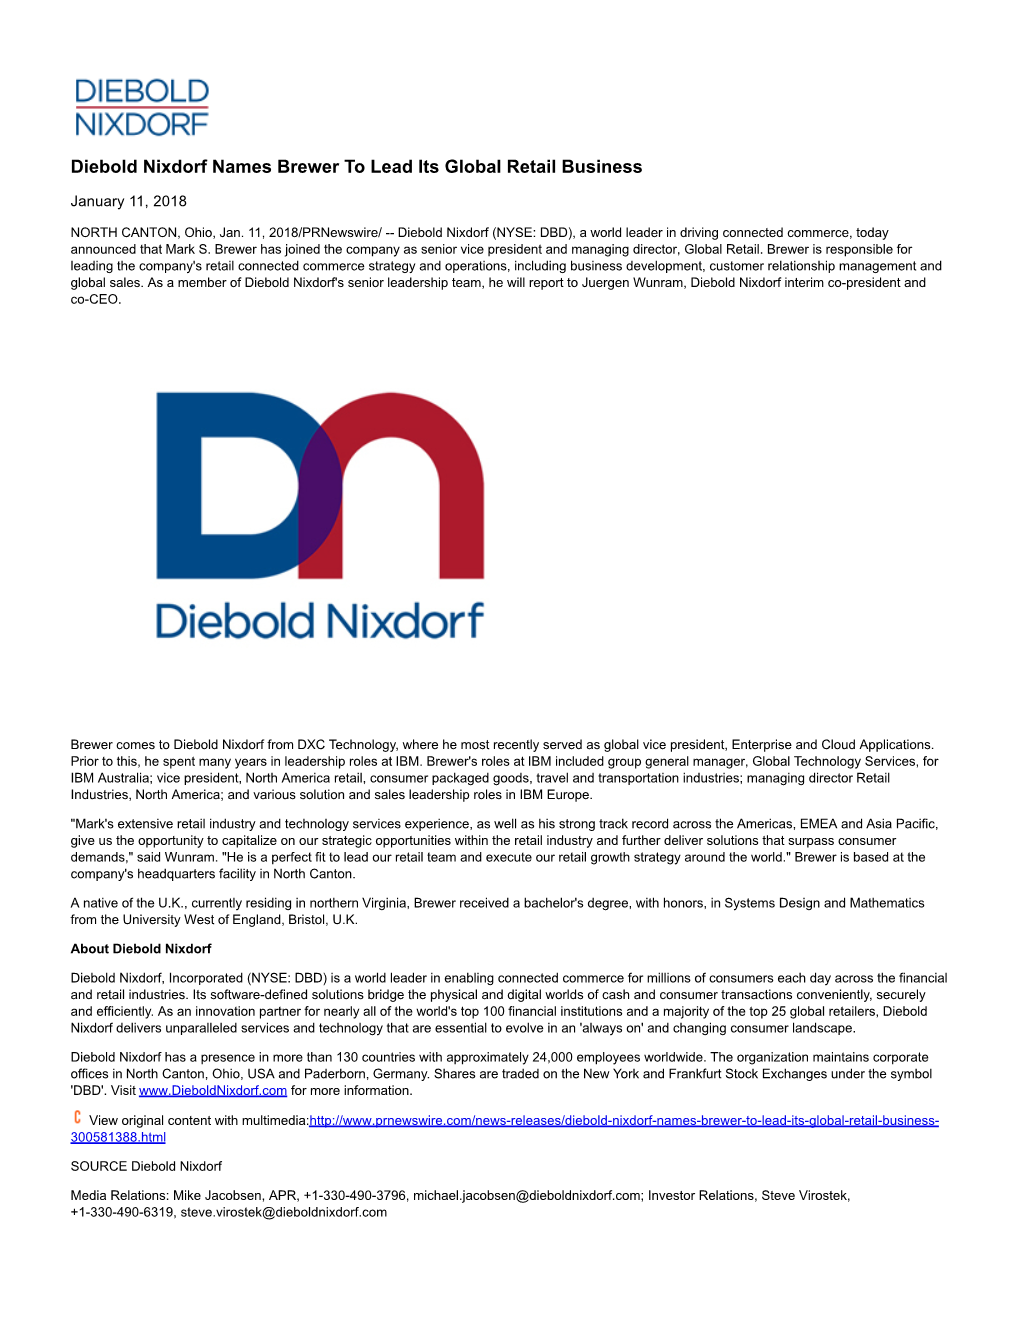 Diebold Nixdorf Names Brewer to Lead Its Global Retail Business